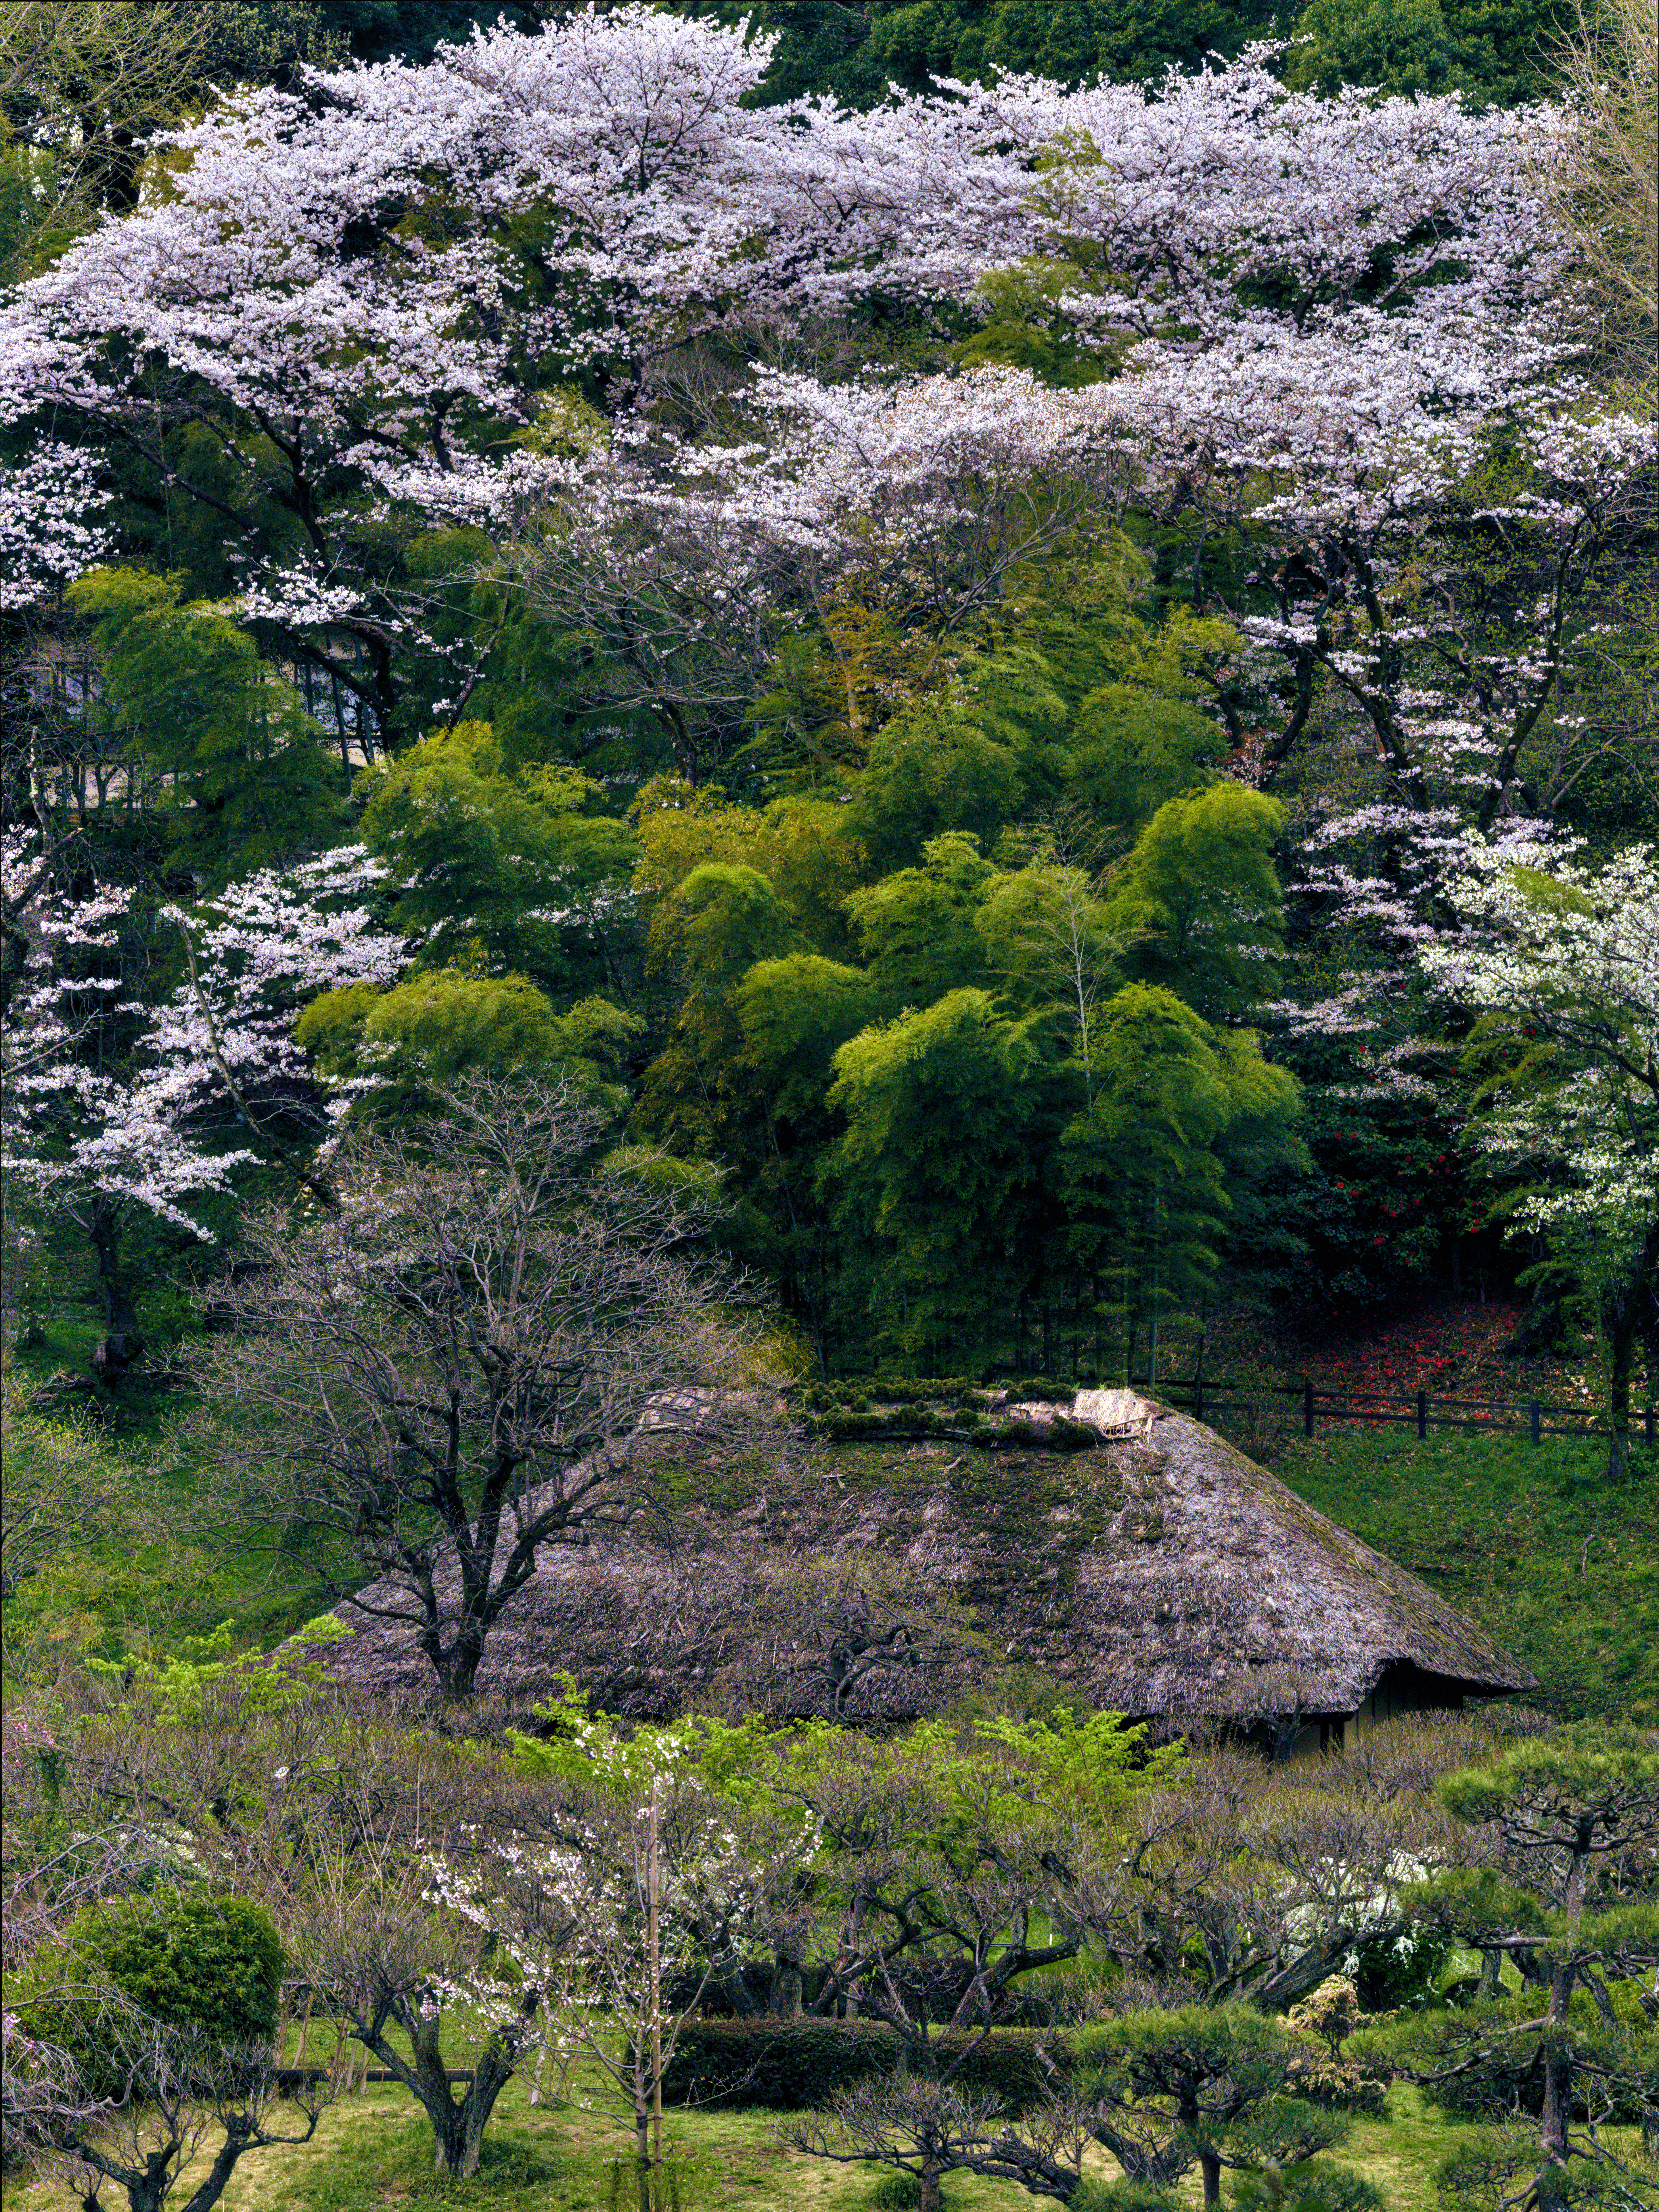 Samurai-Home-at-base-of-bamboo-and-cherry-blossoms-covered-hill-west-tokyo-japan